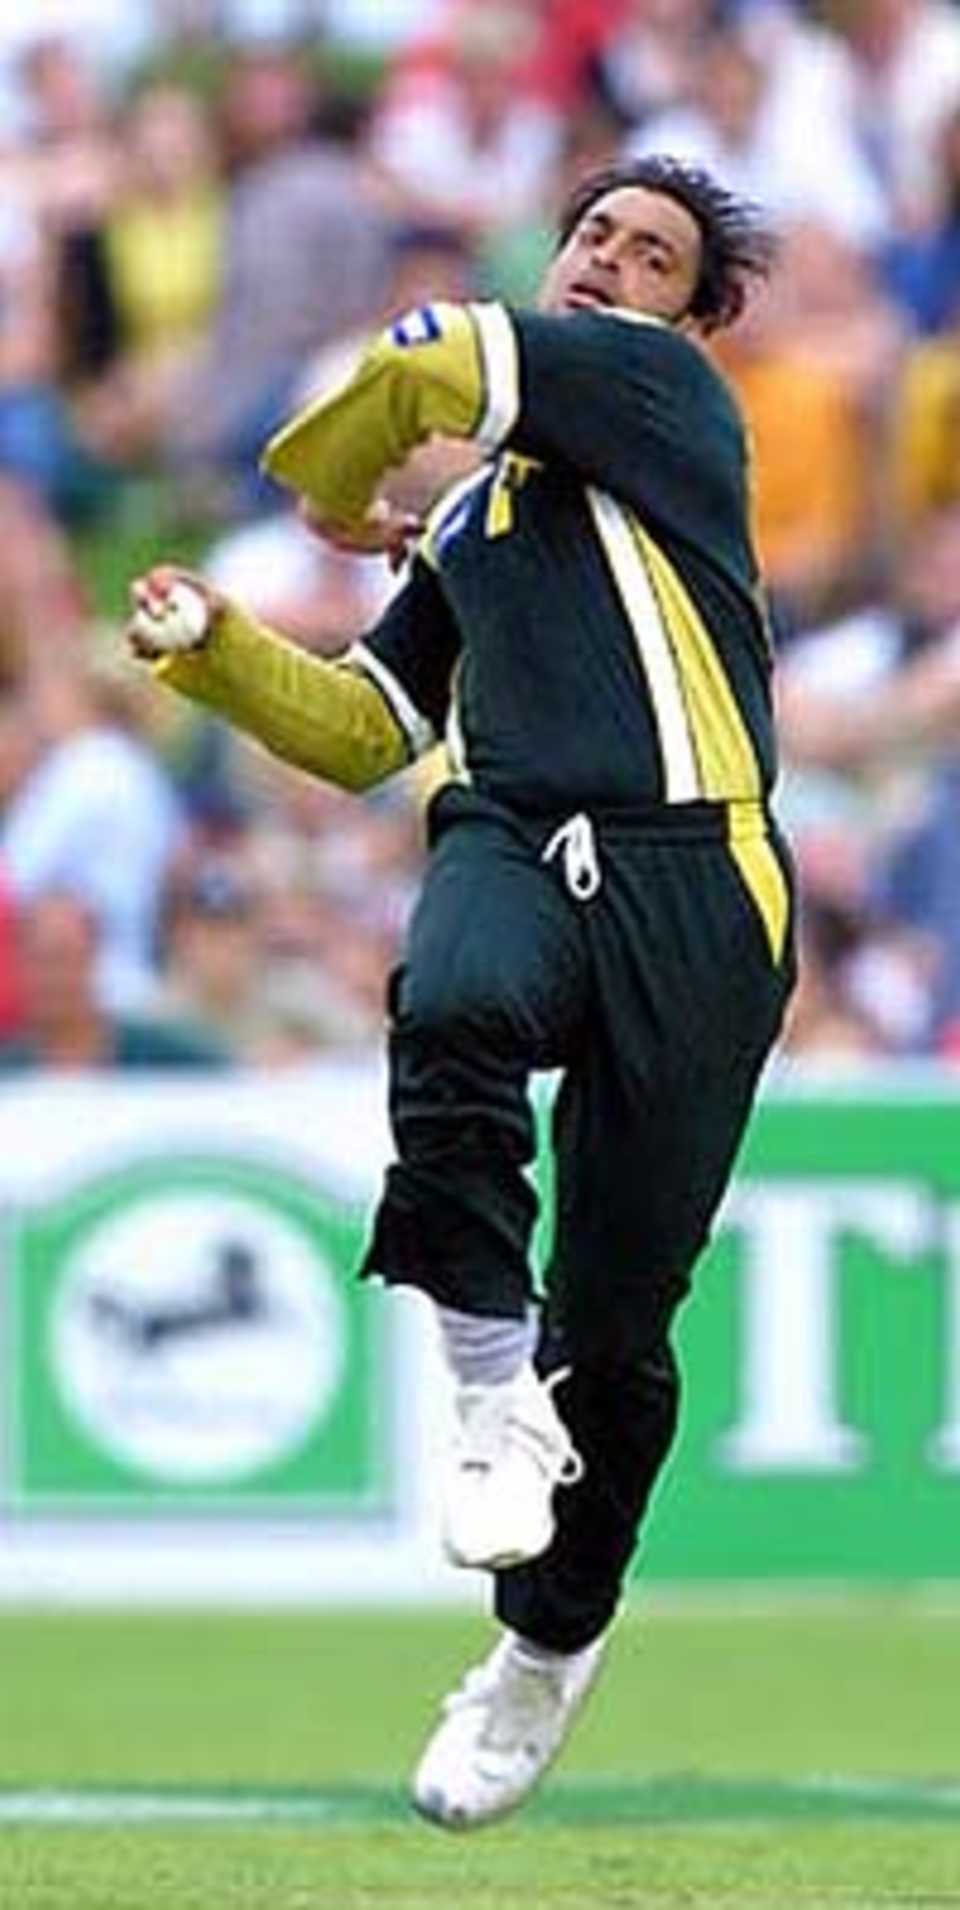 Akhtar bowling against New Zealand in the second ODI of the series , Napier, 21 February 2001